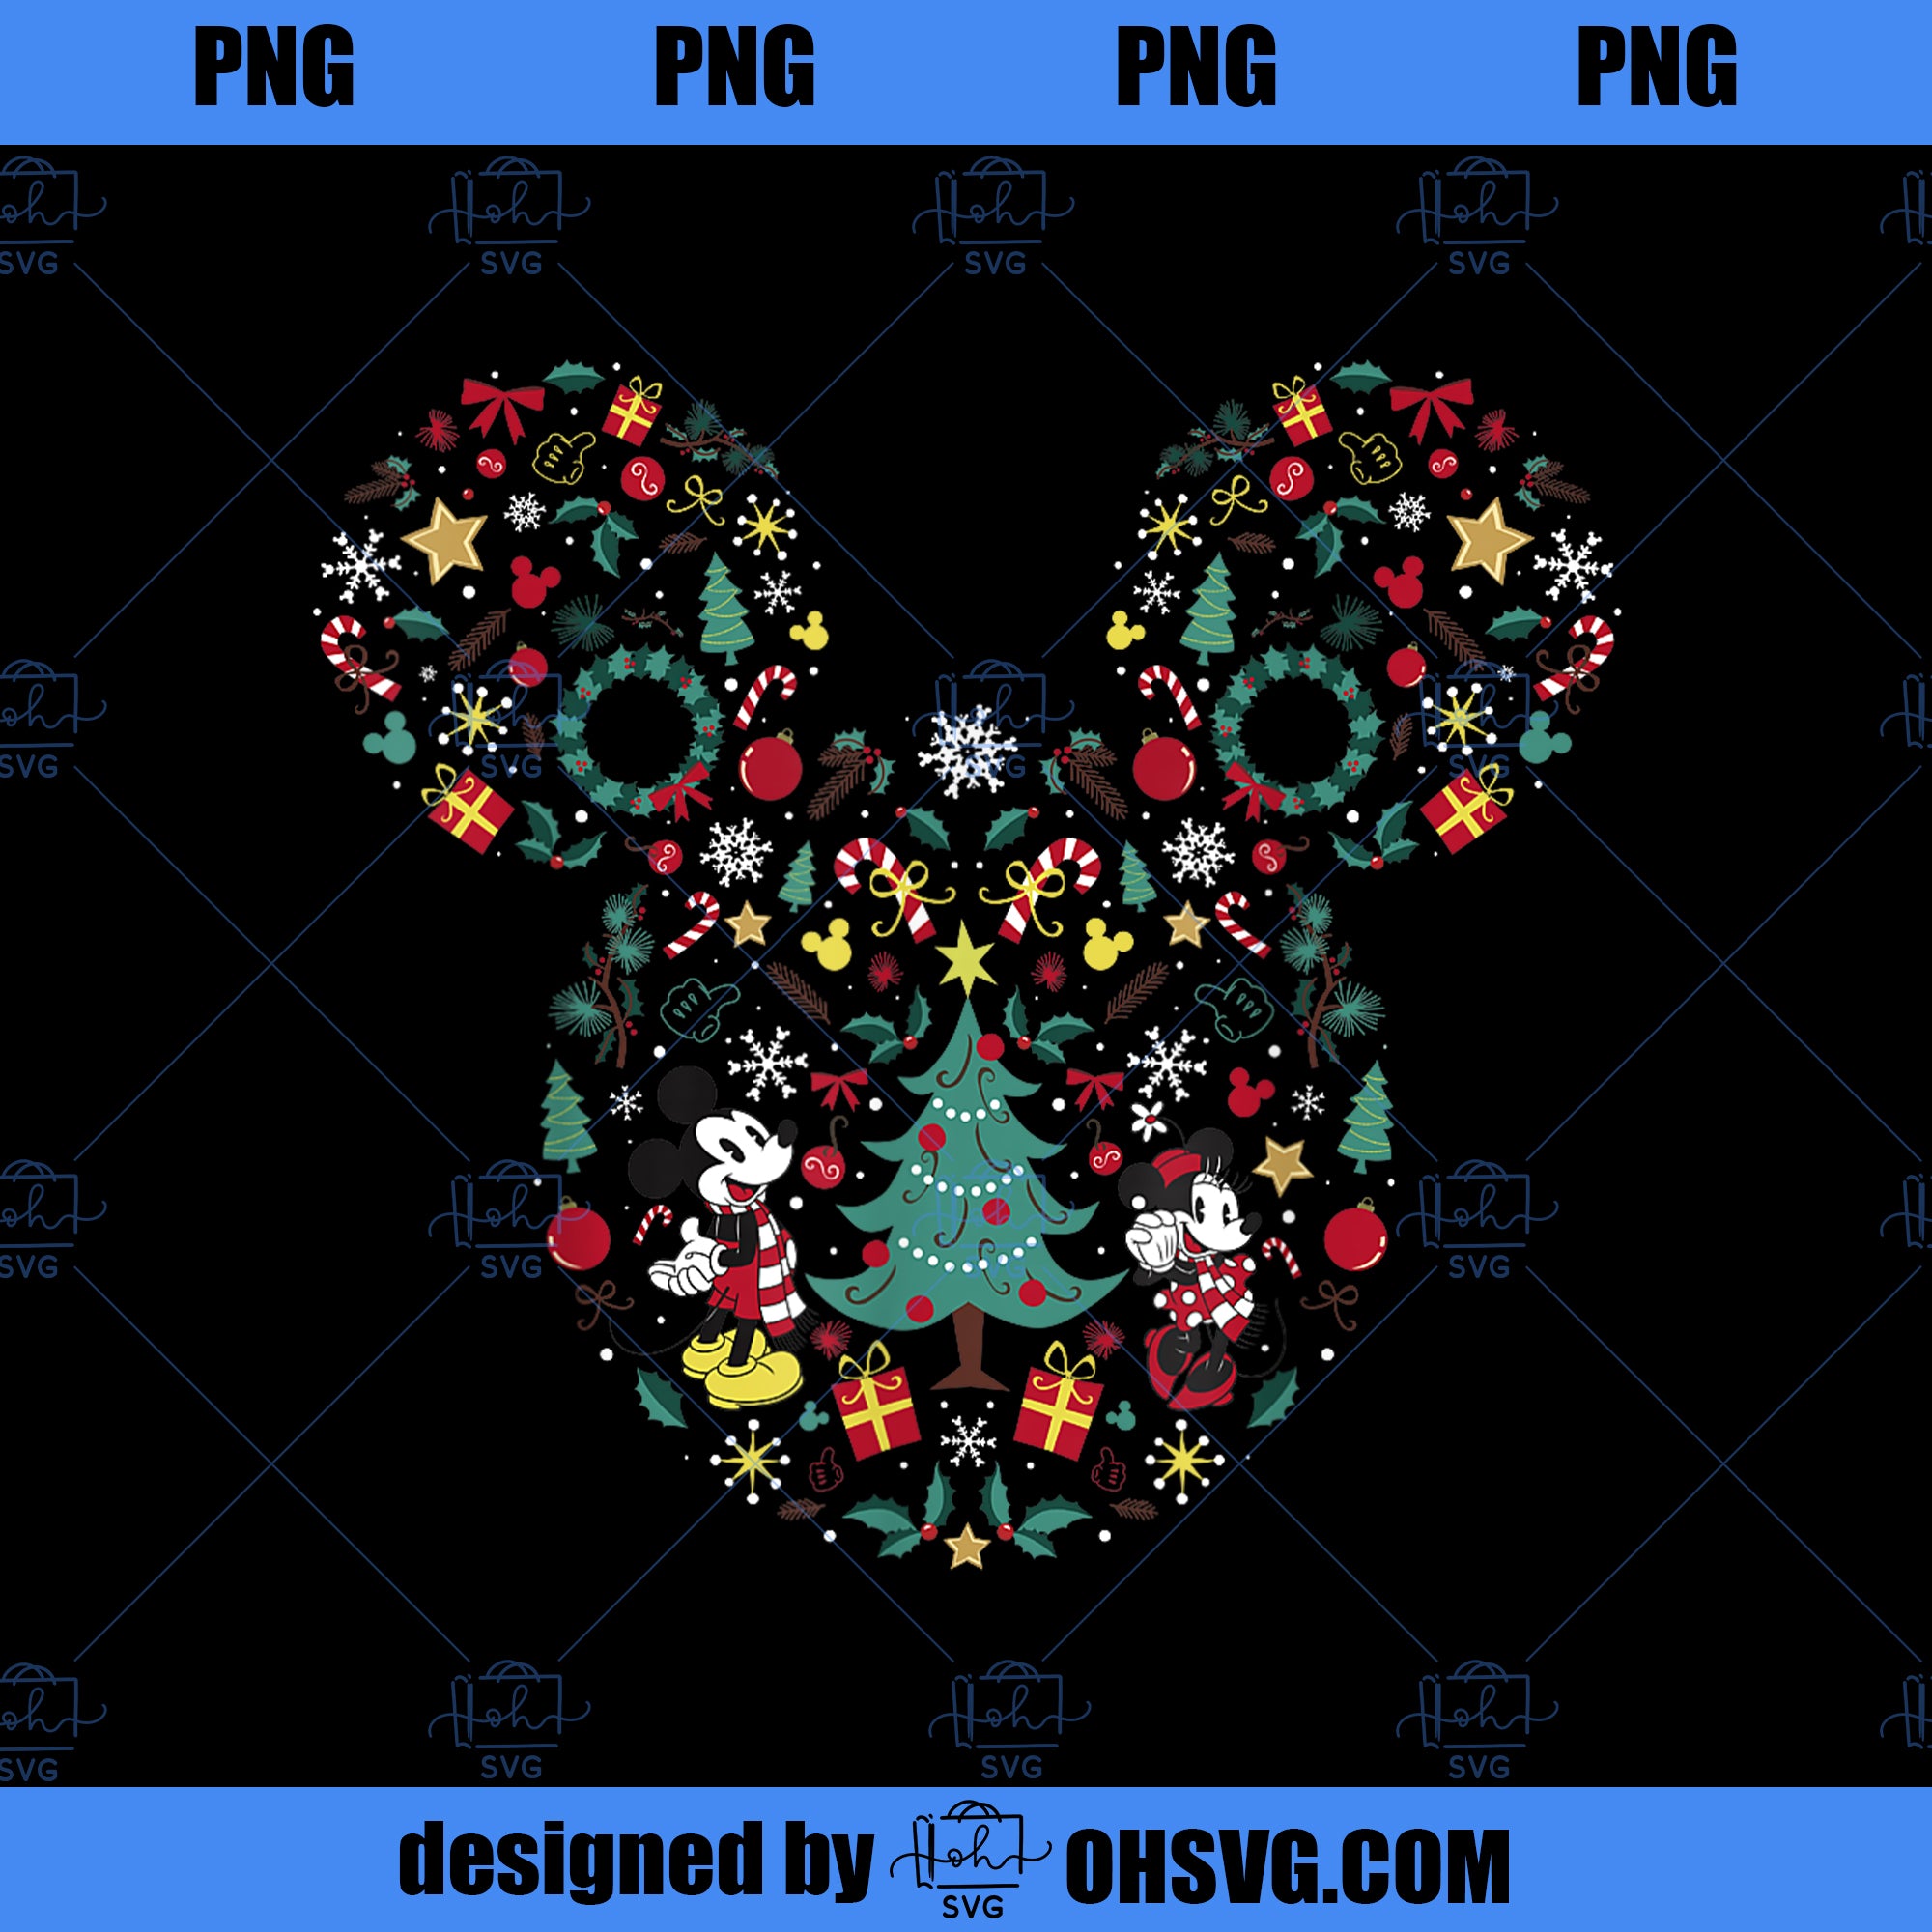 Disney Mickey And Minnie Christmas Mashup PNG, Disney PNG, Mickey Friends PNG